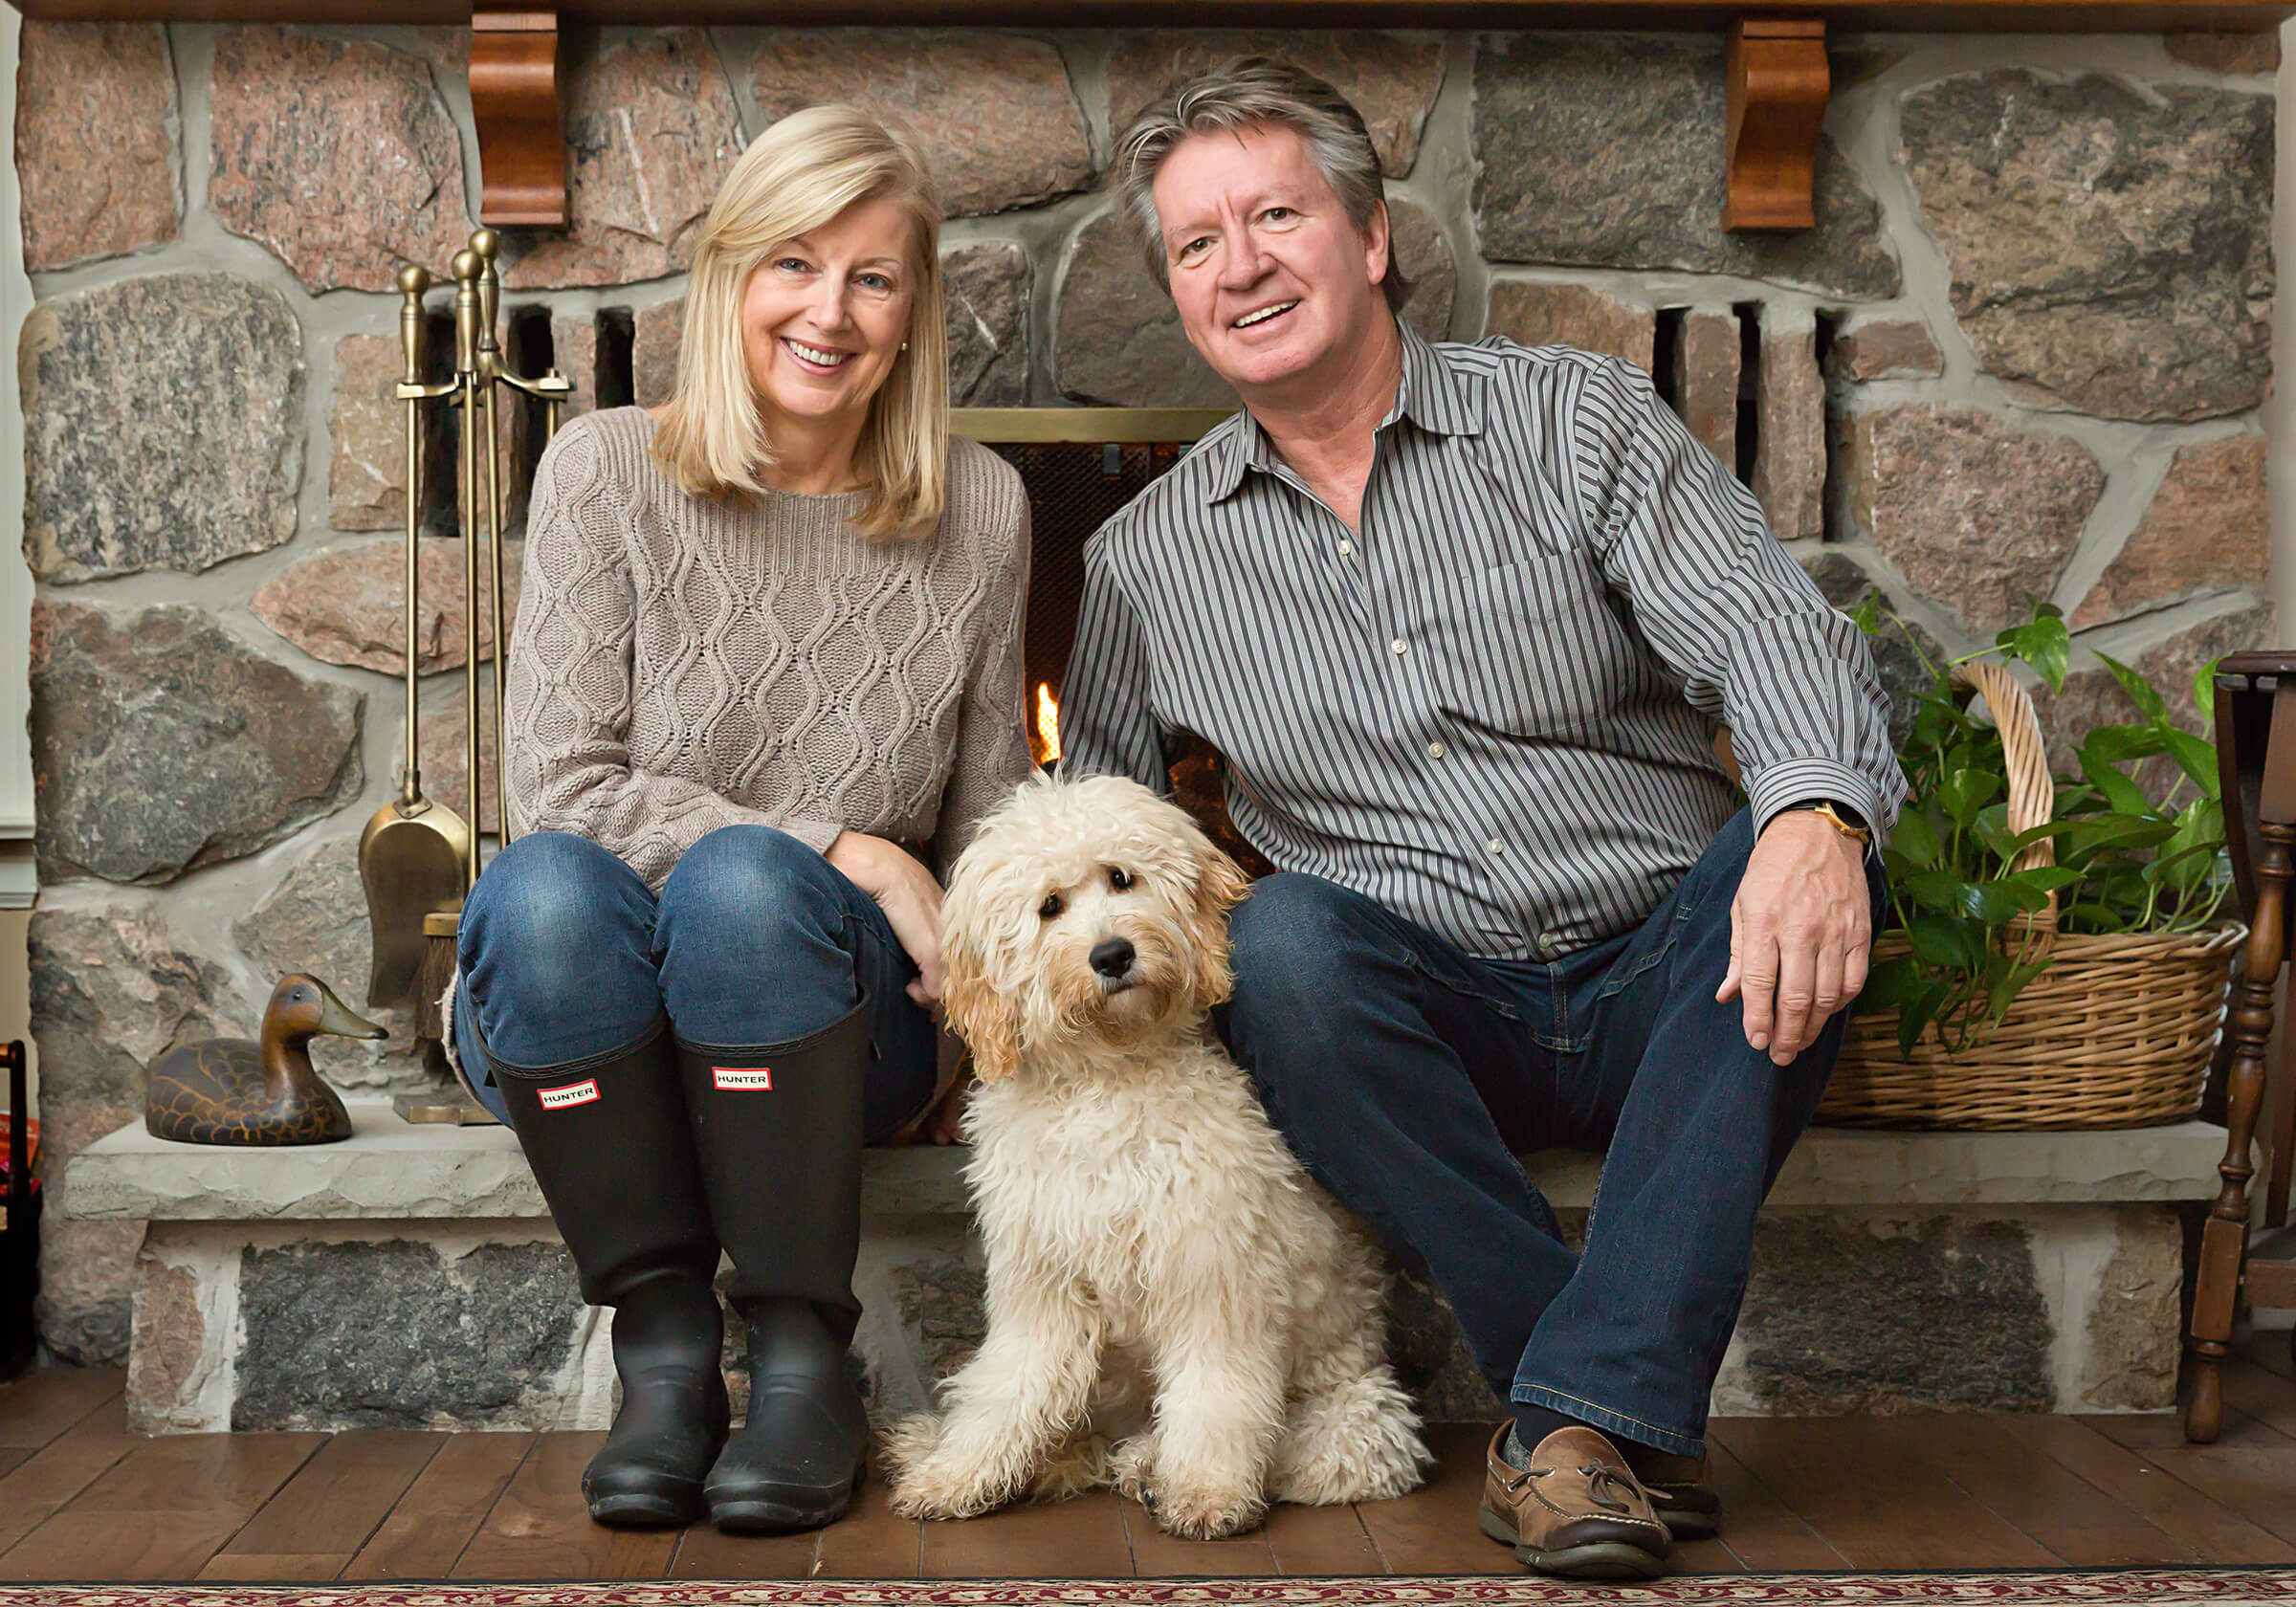 couple photographed with doodle dog in their home